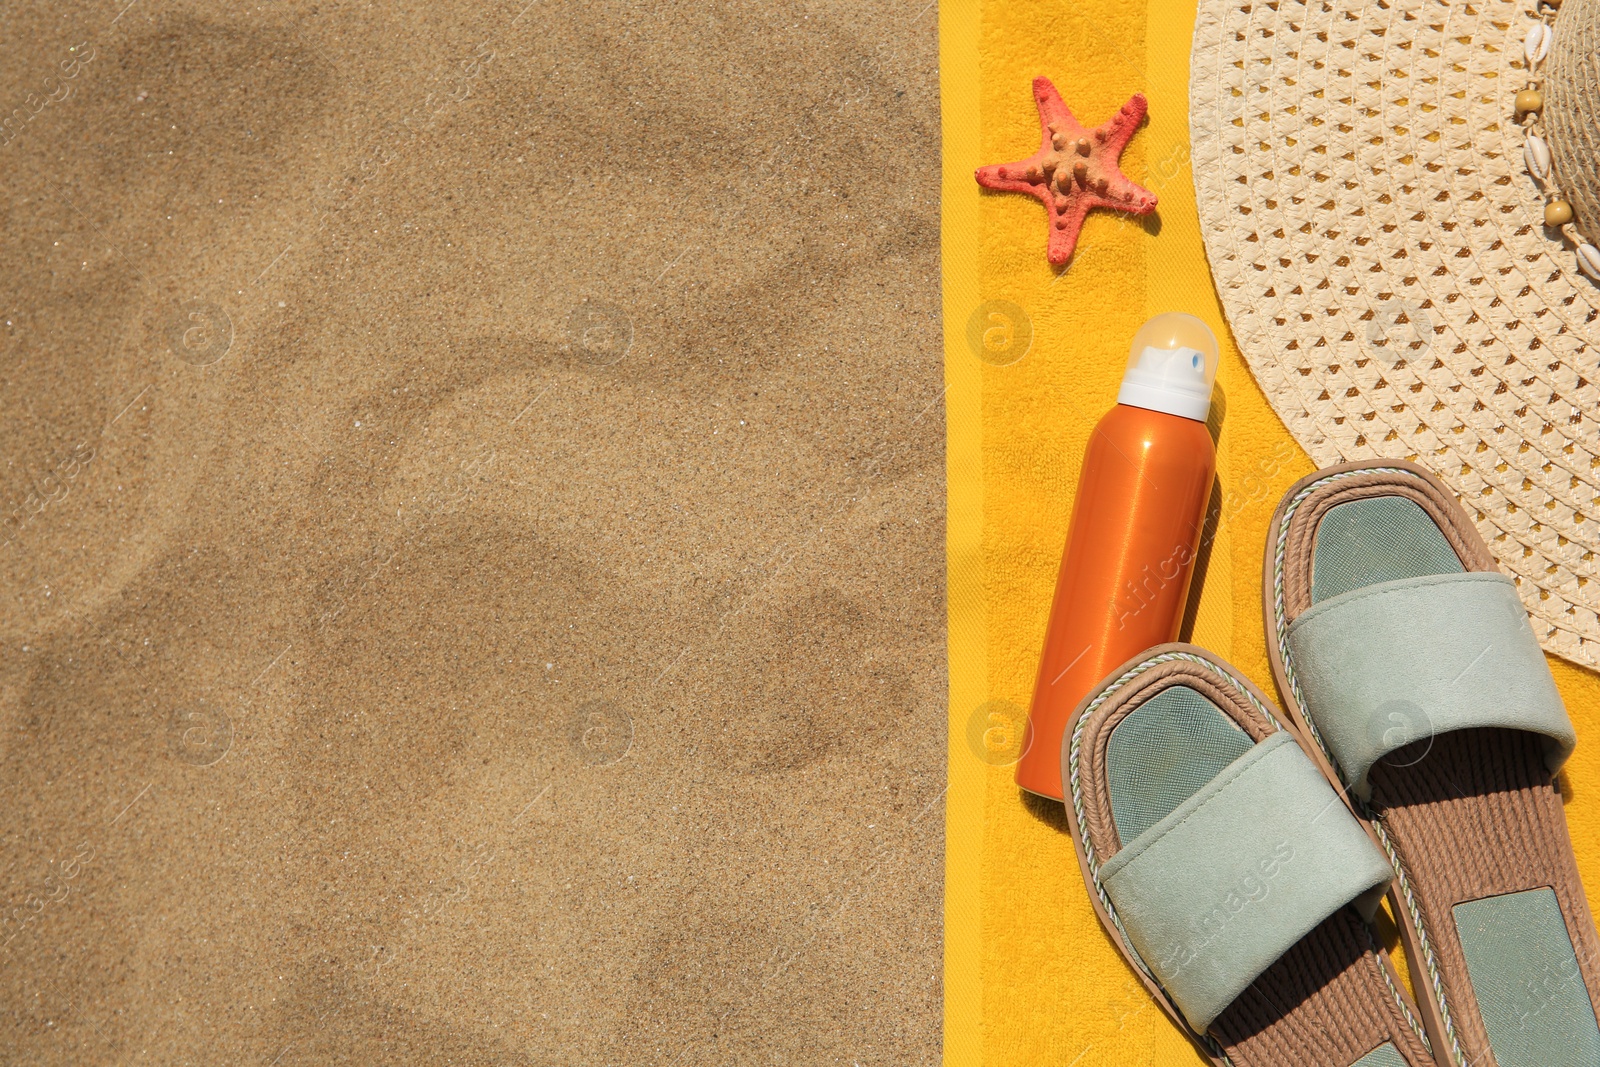 Photo of Sunscreen, starfish and beach accessories on sand, top view with space for text. Sun protection care